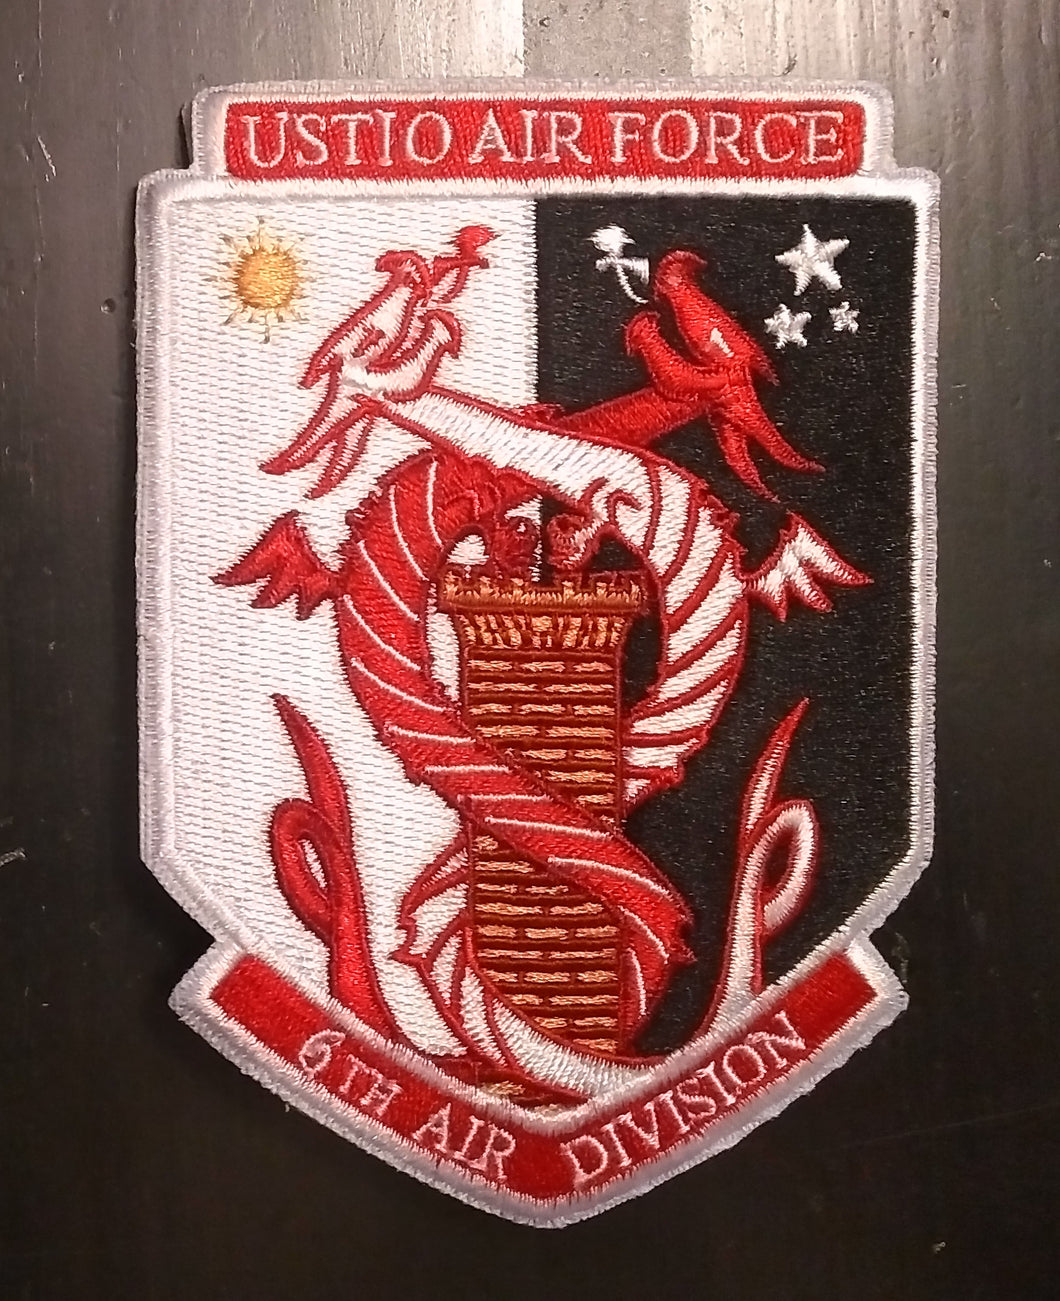 Ustio 6th Air Division Patch